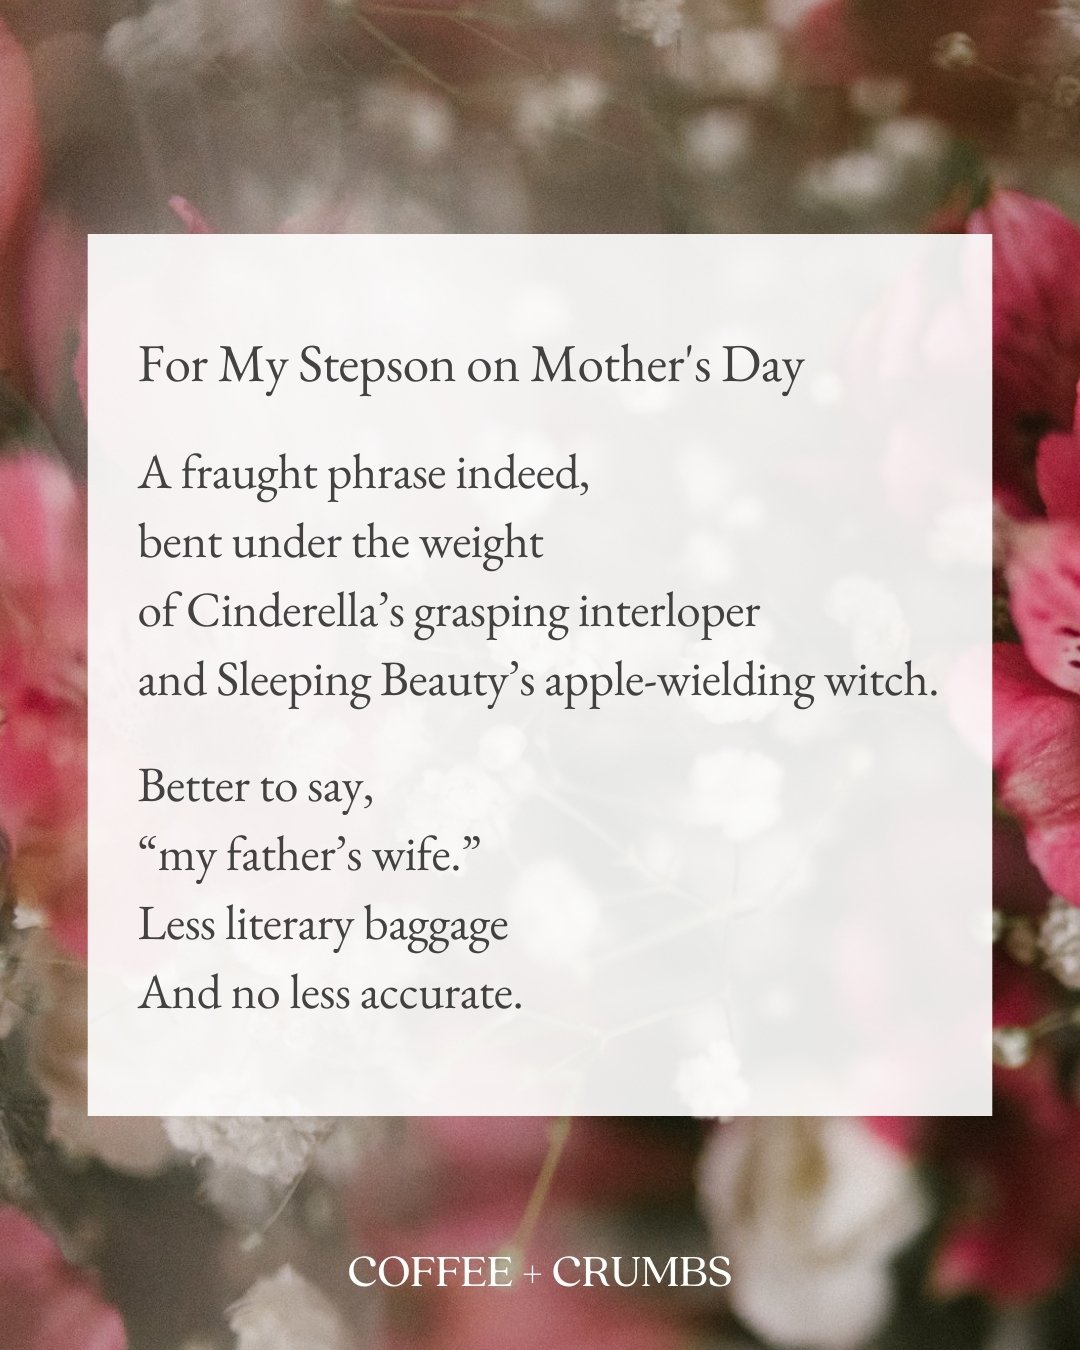 A fraught phrase indeed,
bent under the weight
of Cinderella&rsquo;s grasping interloper
and Sleeping Beauty&rsquo;s apple-wielding witch.

Better to say,
&ldquo;my father&rsquo;s wife.&rdquo; 
Less literary baggage
And no less accurate. 

But you ma